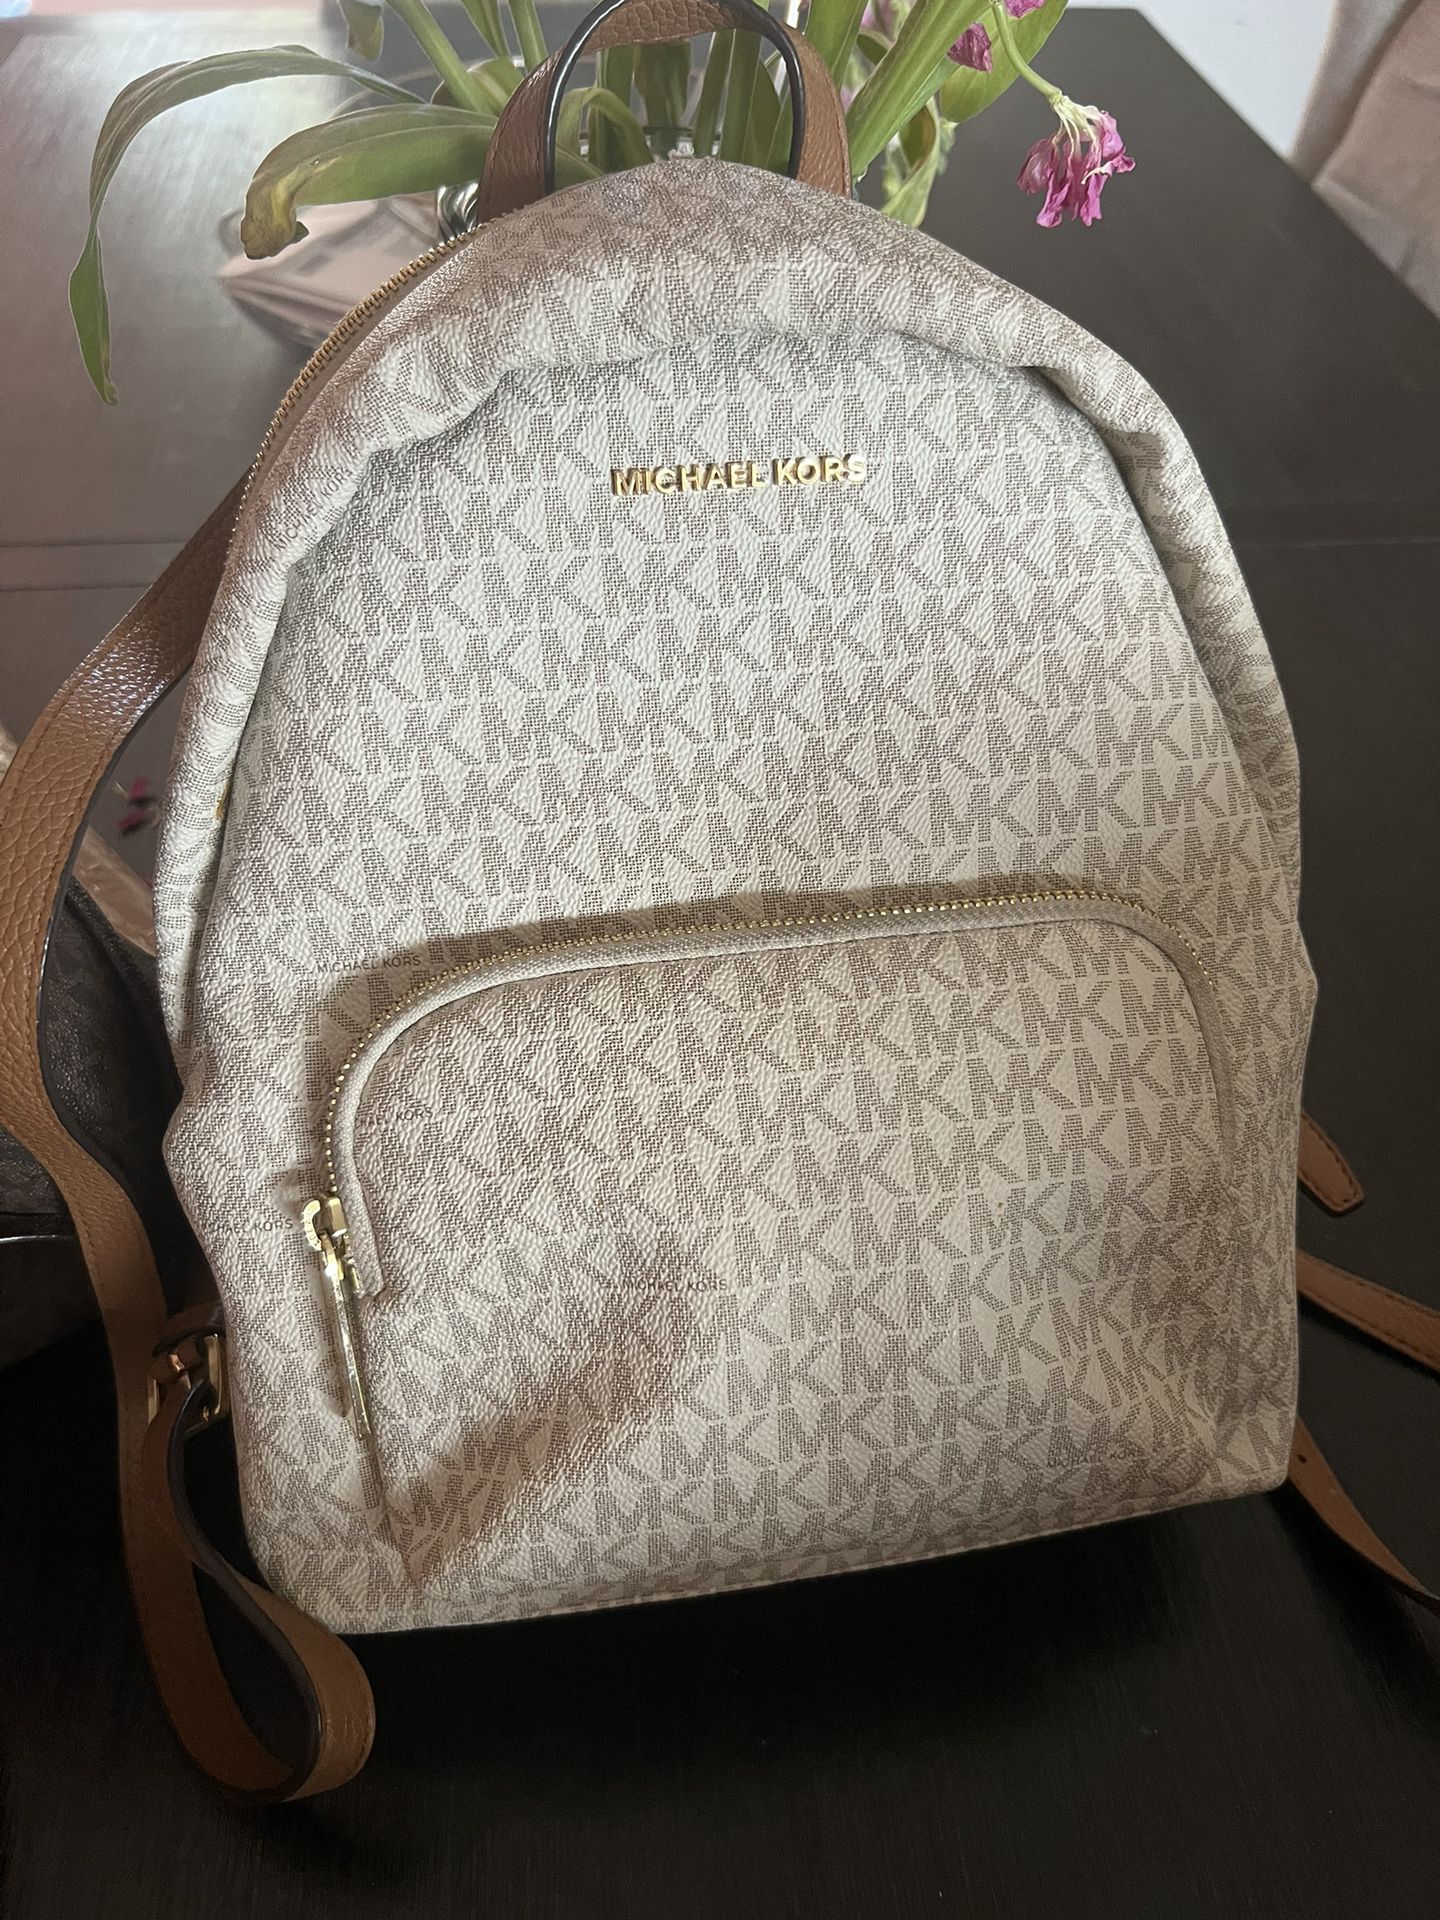 Michael Kors Backpack for Sale in Palmdale, CA - OfferUp